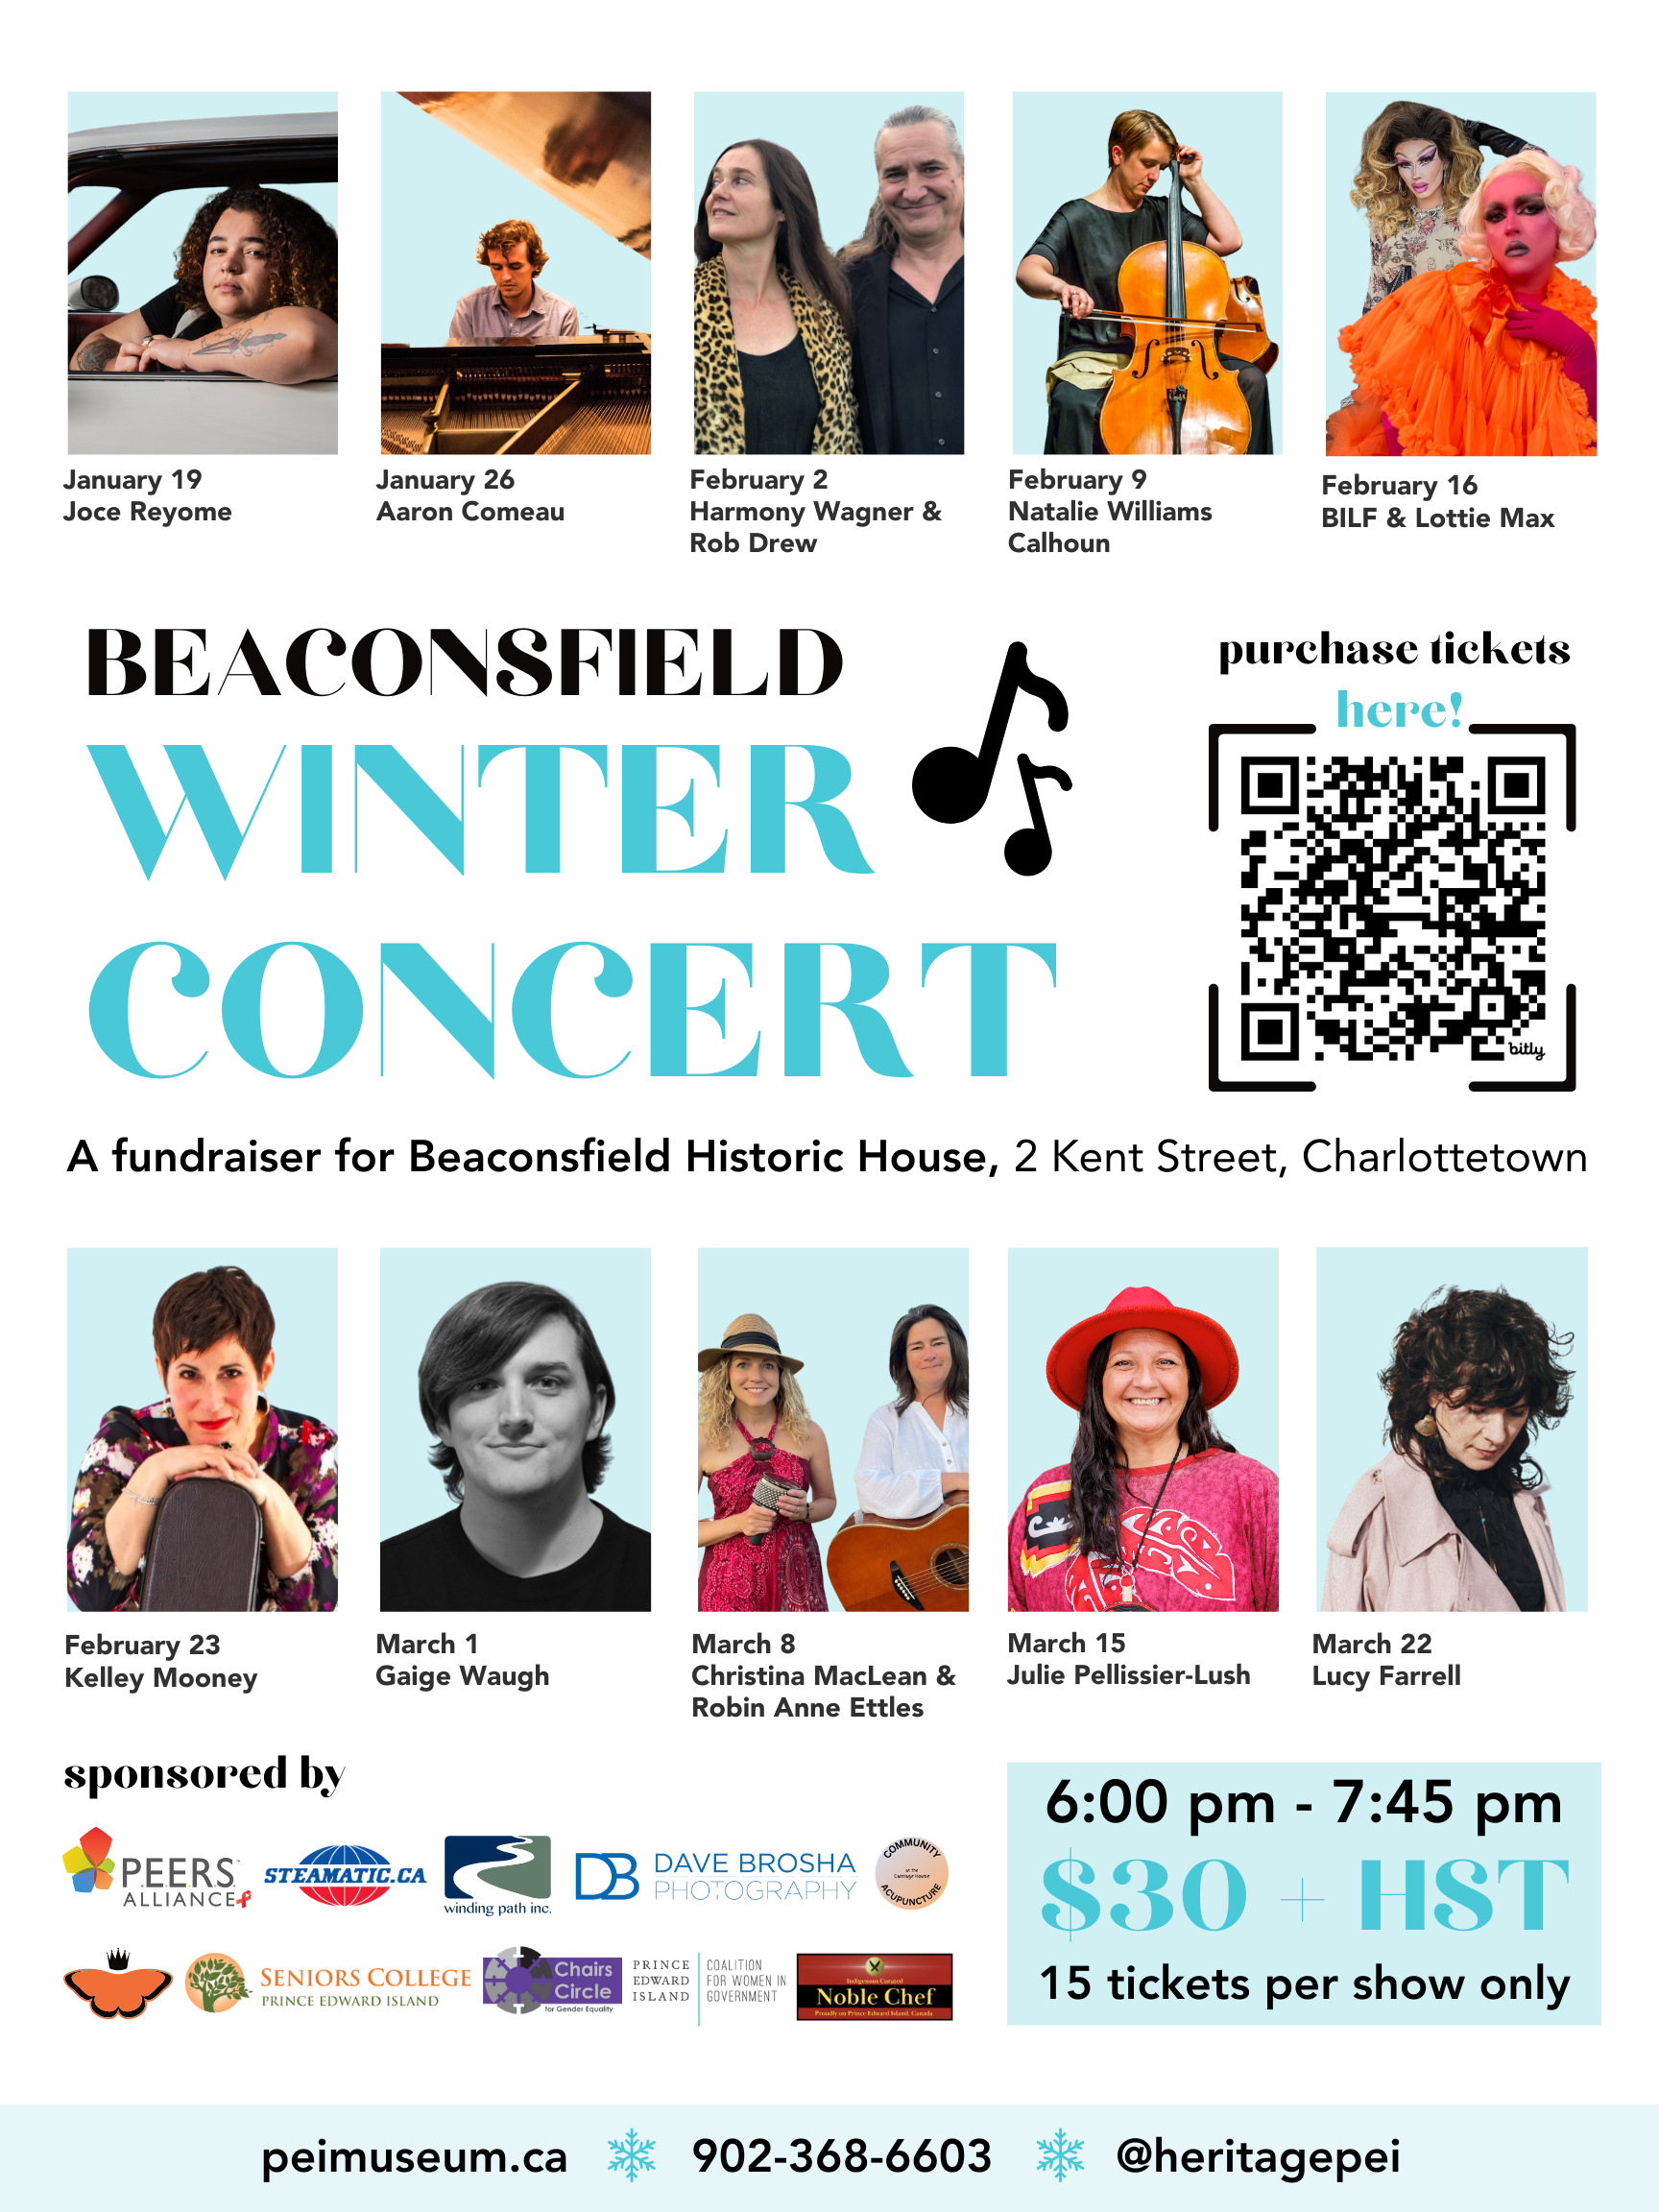 Poster of the Beaconsfield Winter Concert Series, featuring 10 artists and sponsors